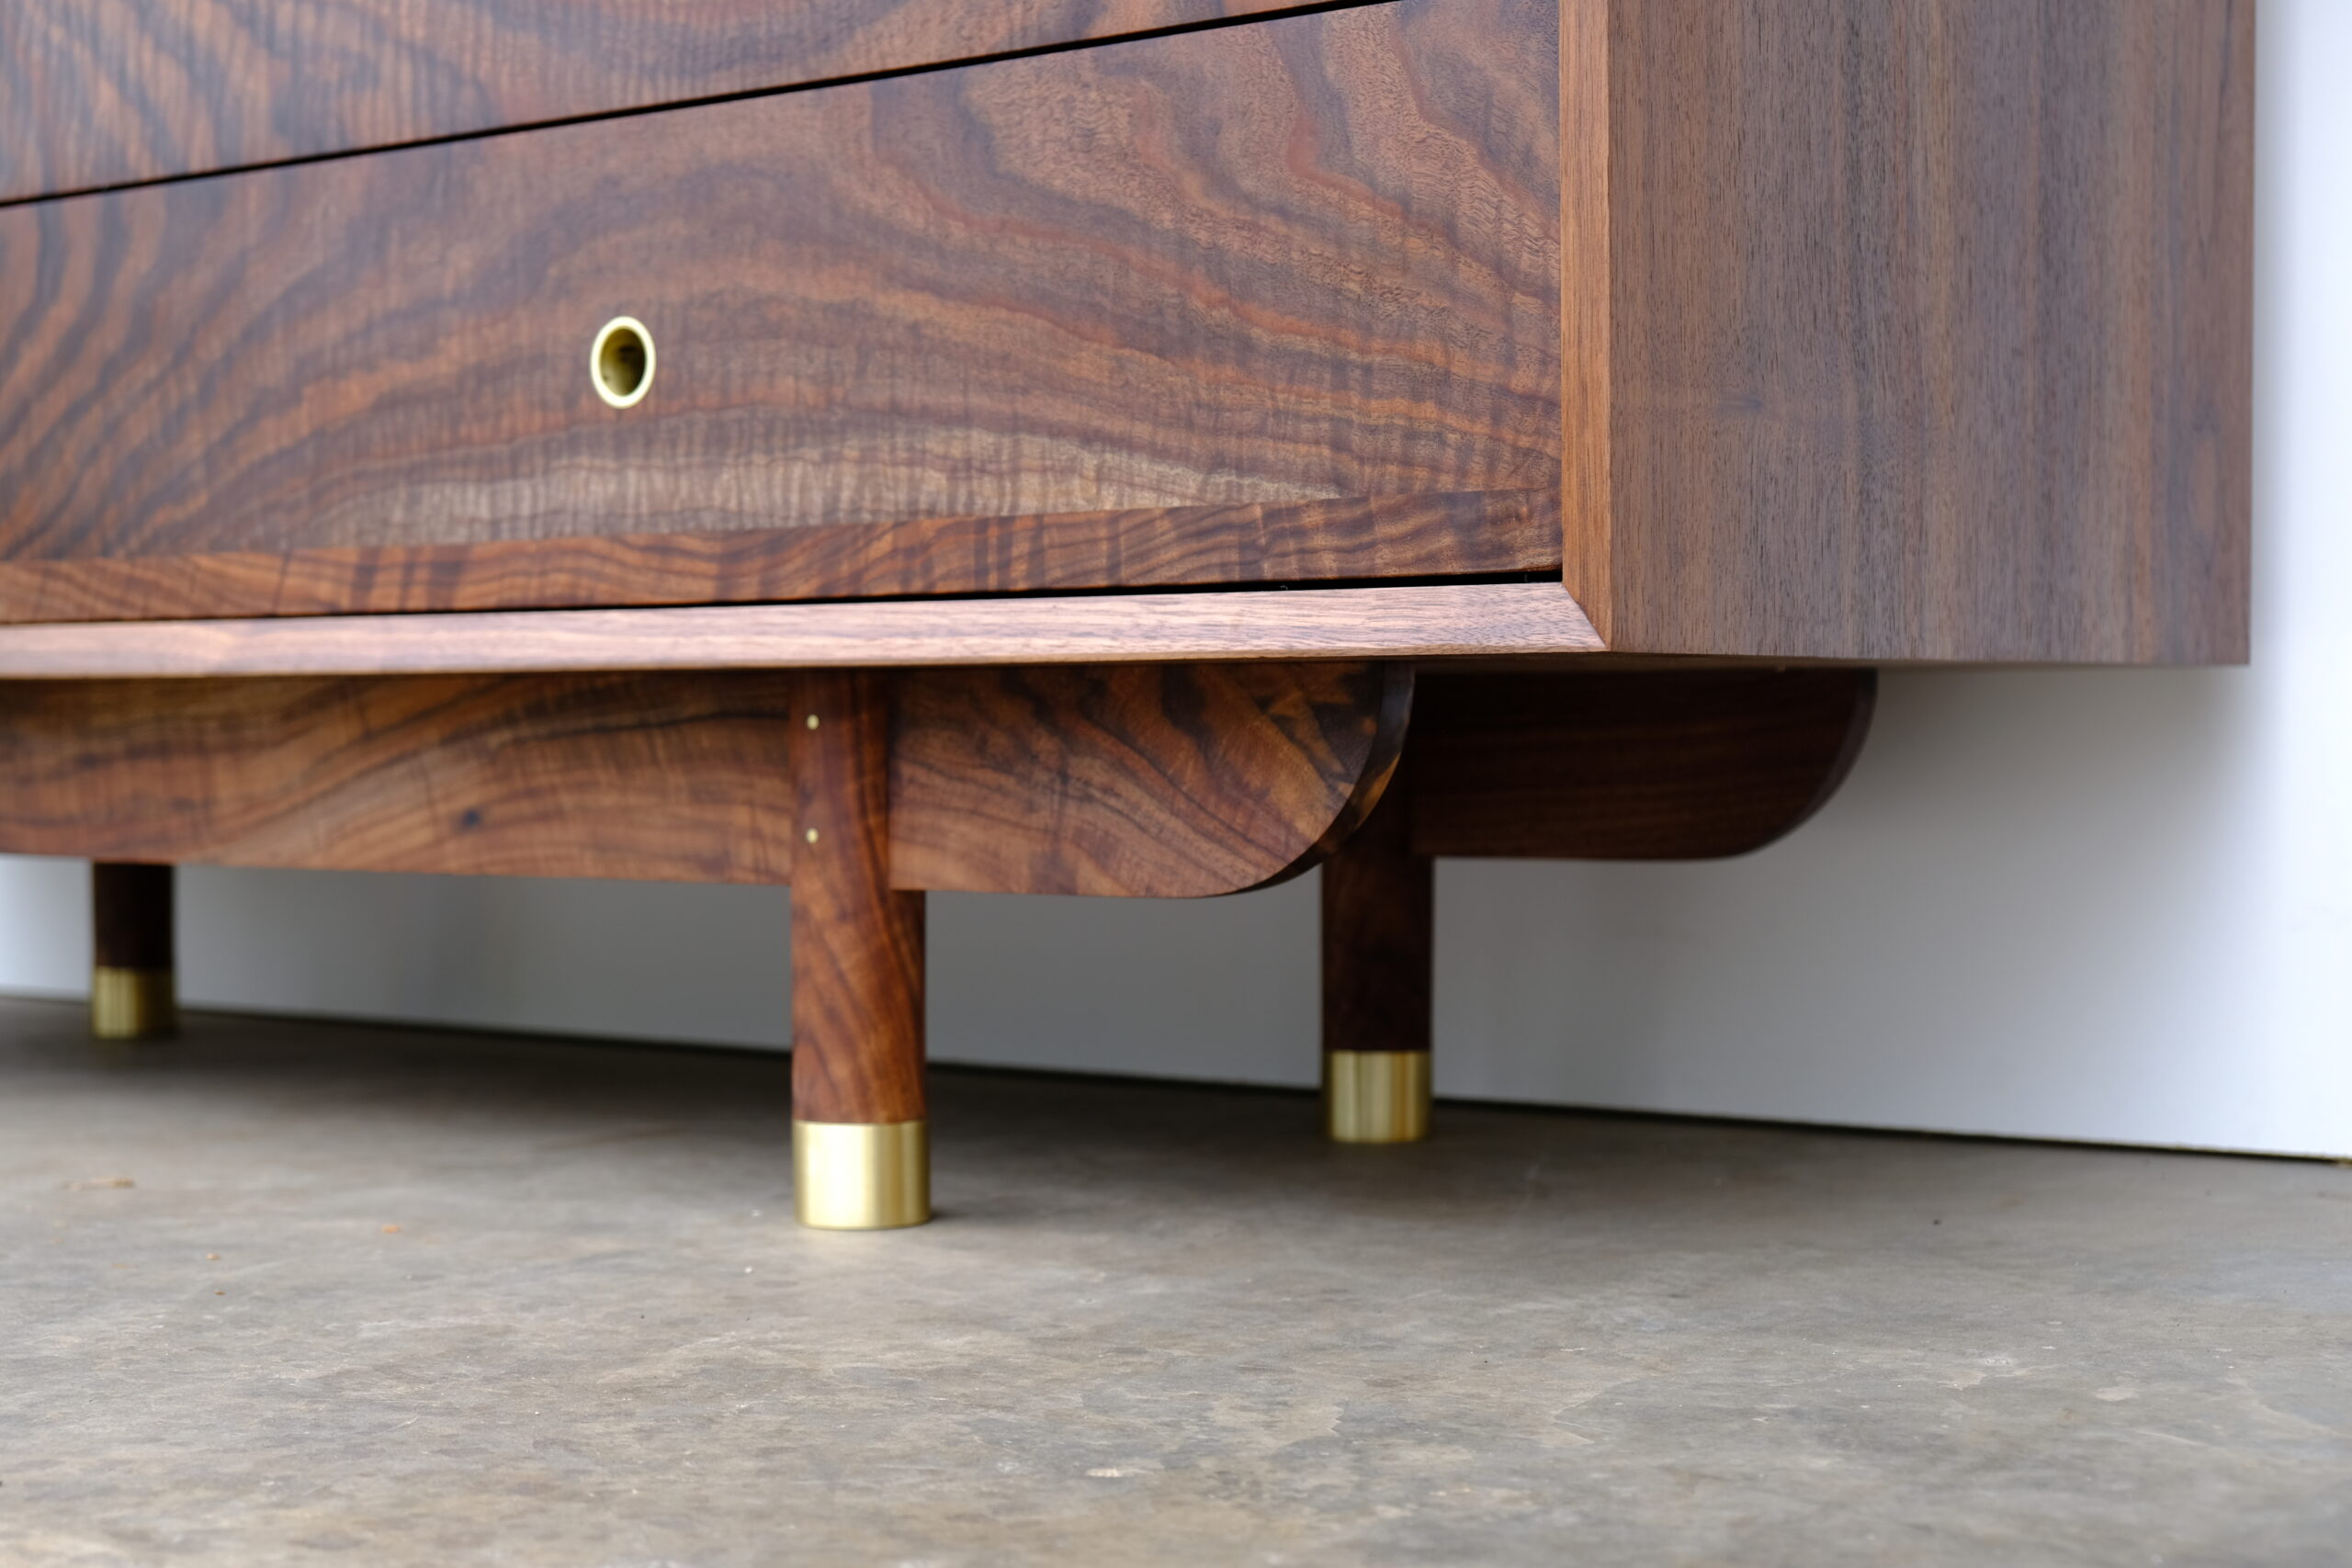 Close up of feet of walnut dresser that have brass caps on the bottom.